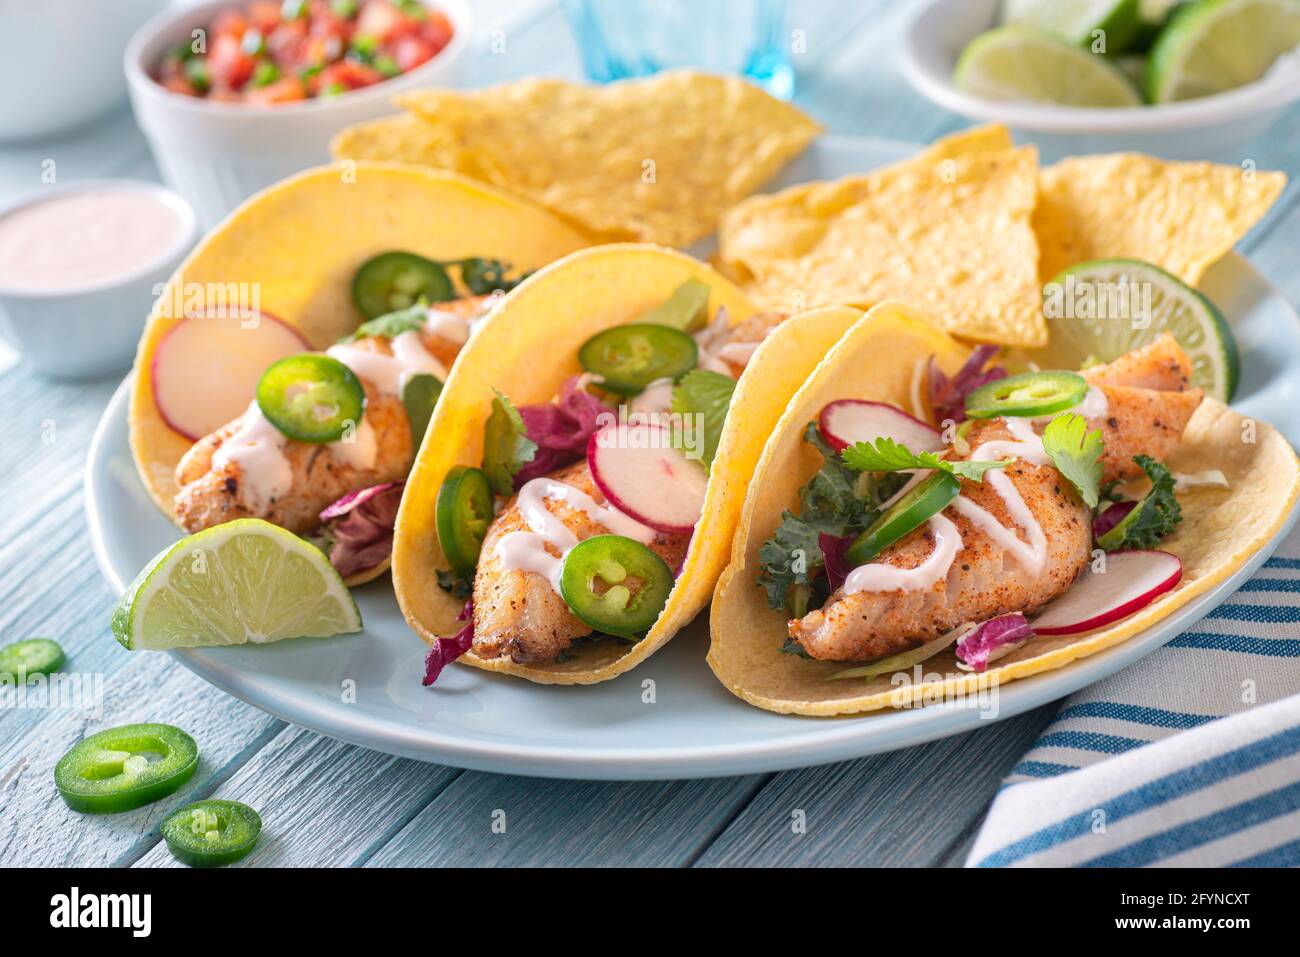 Delicious traditional spicy fish tacos with jalapeno, cilantro, cabbage and radish, Stock Photo